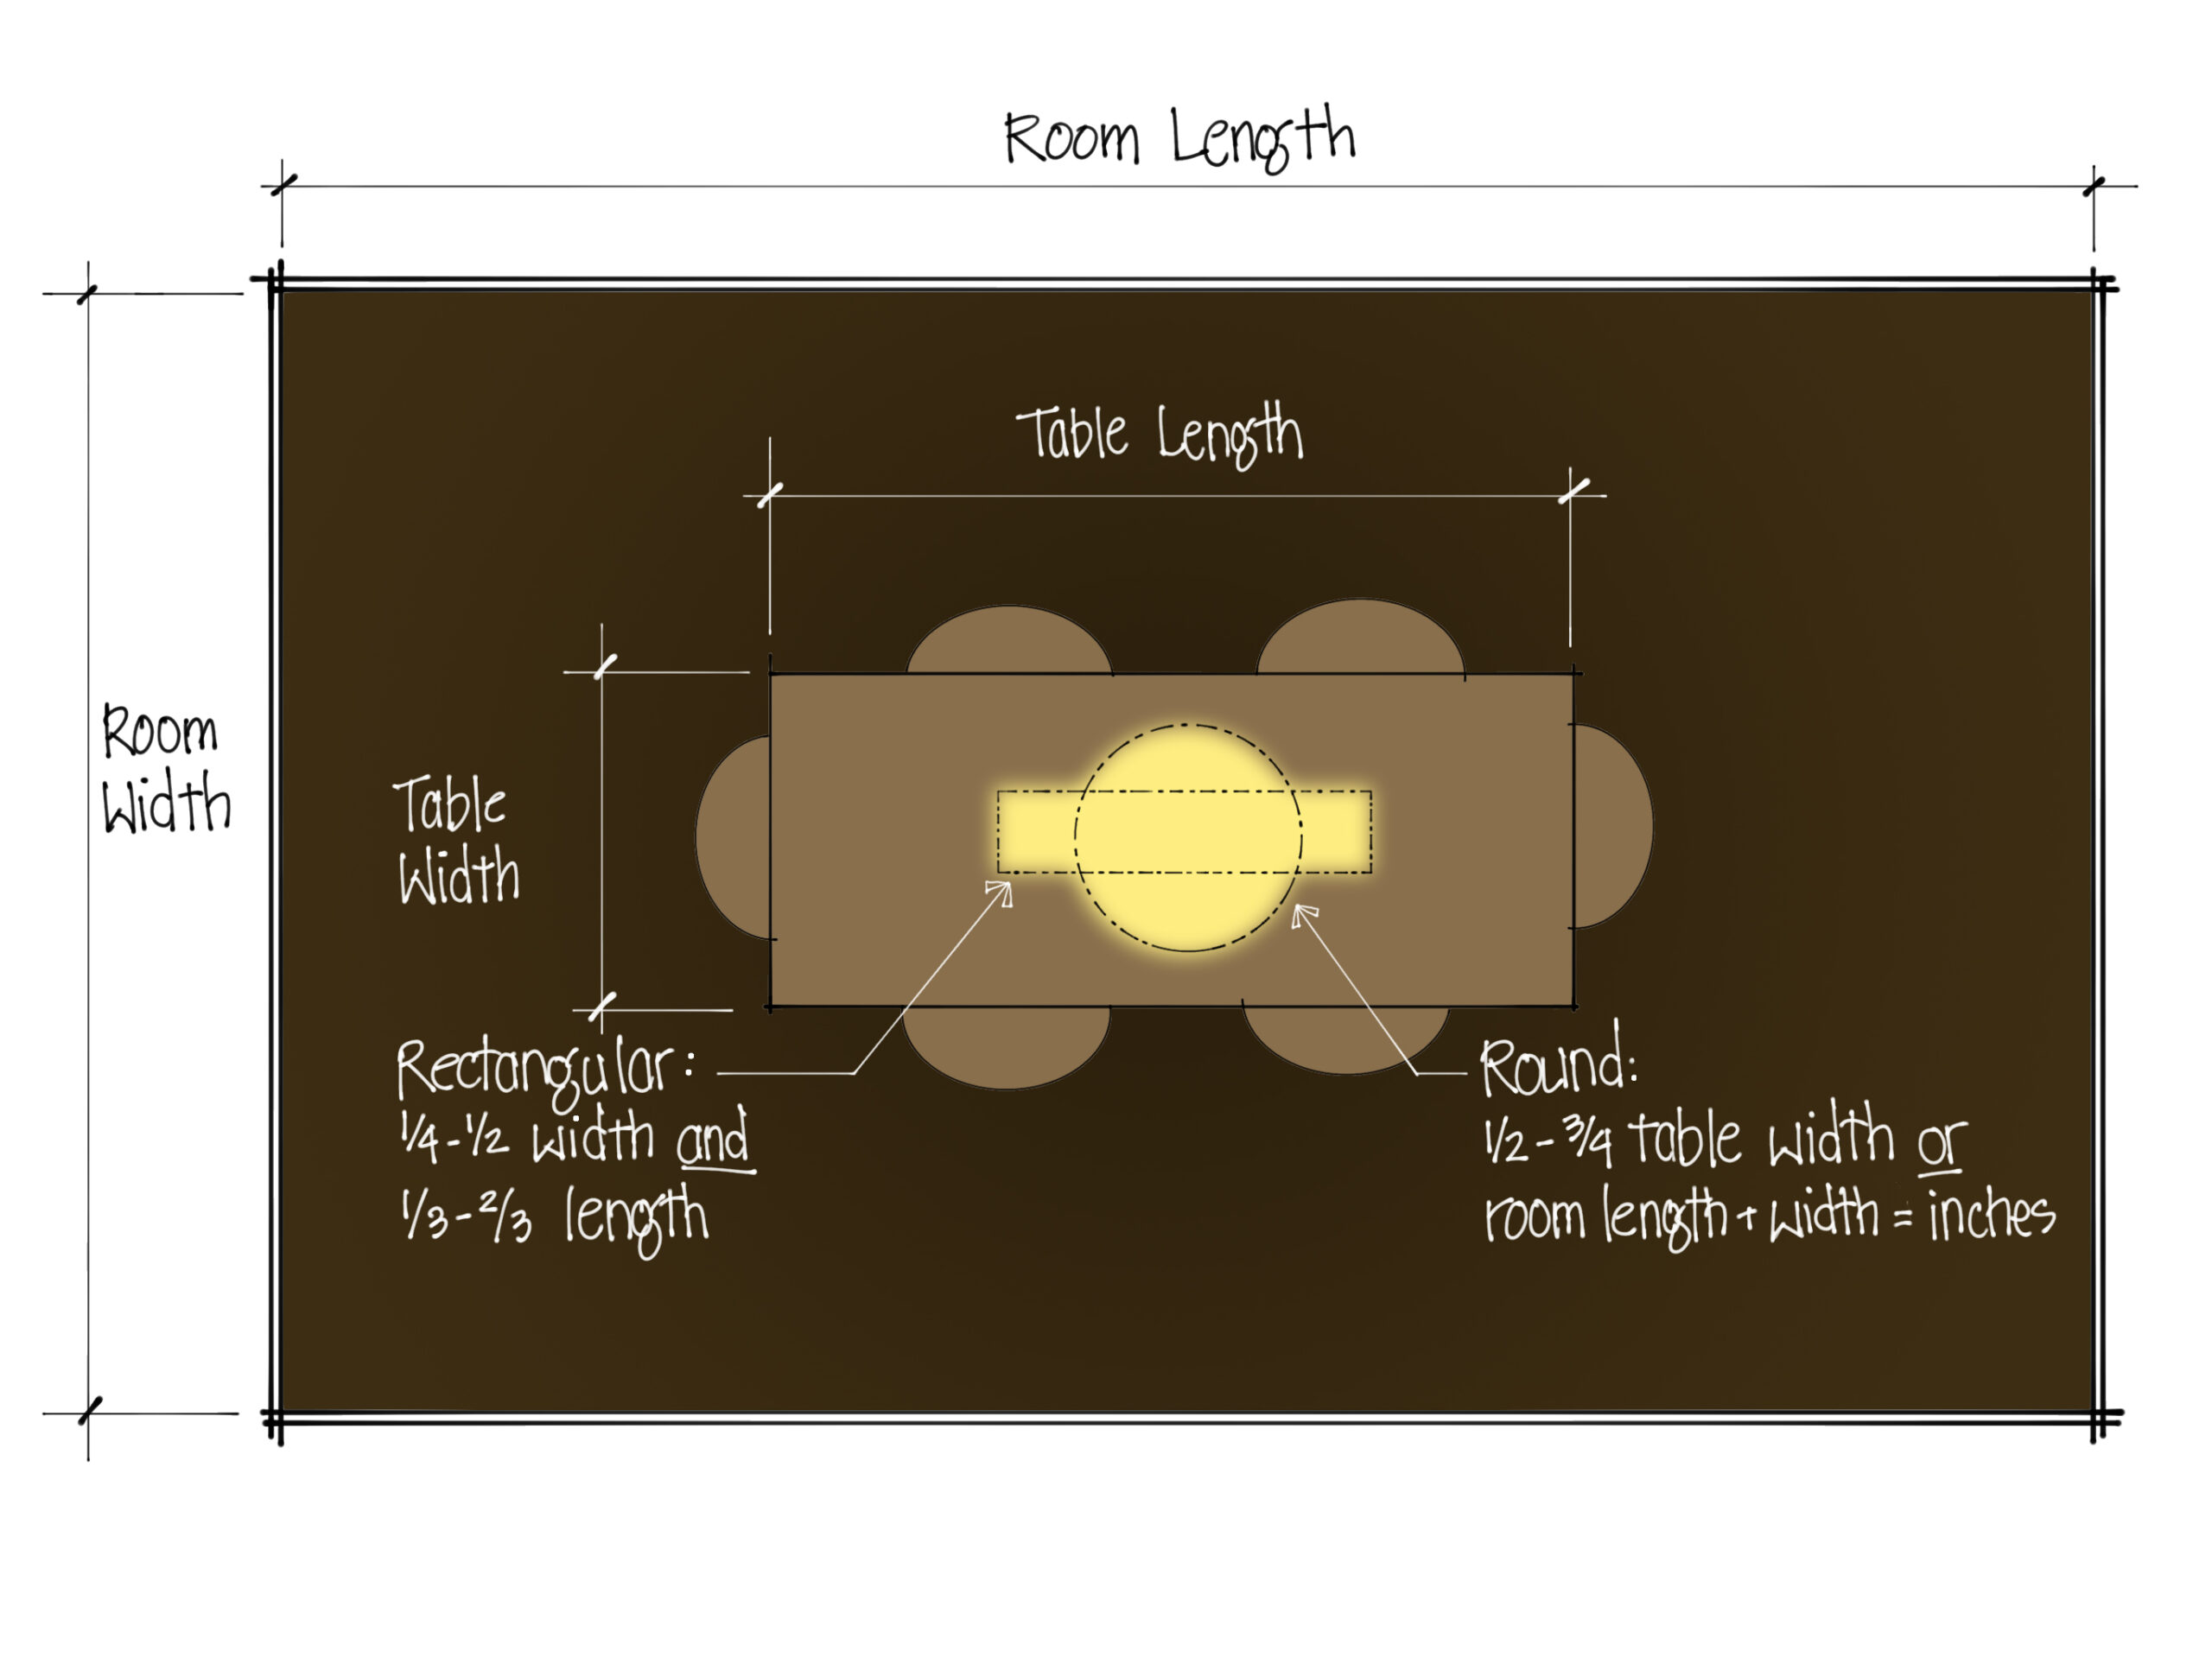 A diagram of a rectangular dining room with labels for the Room Length, Room Width, Table Length, and Table Width. In the center of the table, a chandelier is defined by a circle and rectangle. Dimensions for the rectangle is 1/4-1/2 width and 1/3-2/3 length. Dimensions for the Round: 1/2-3/4 width or room length + width = inches.